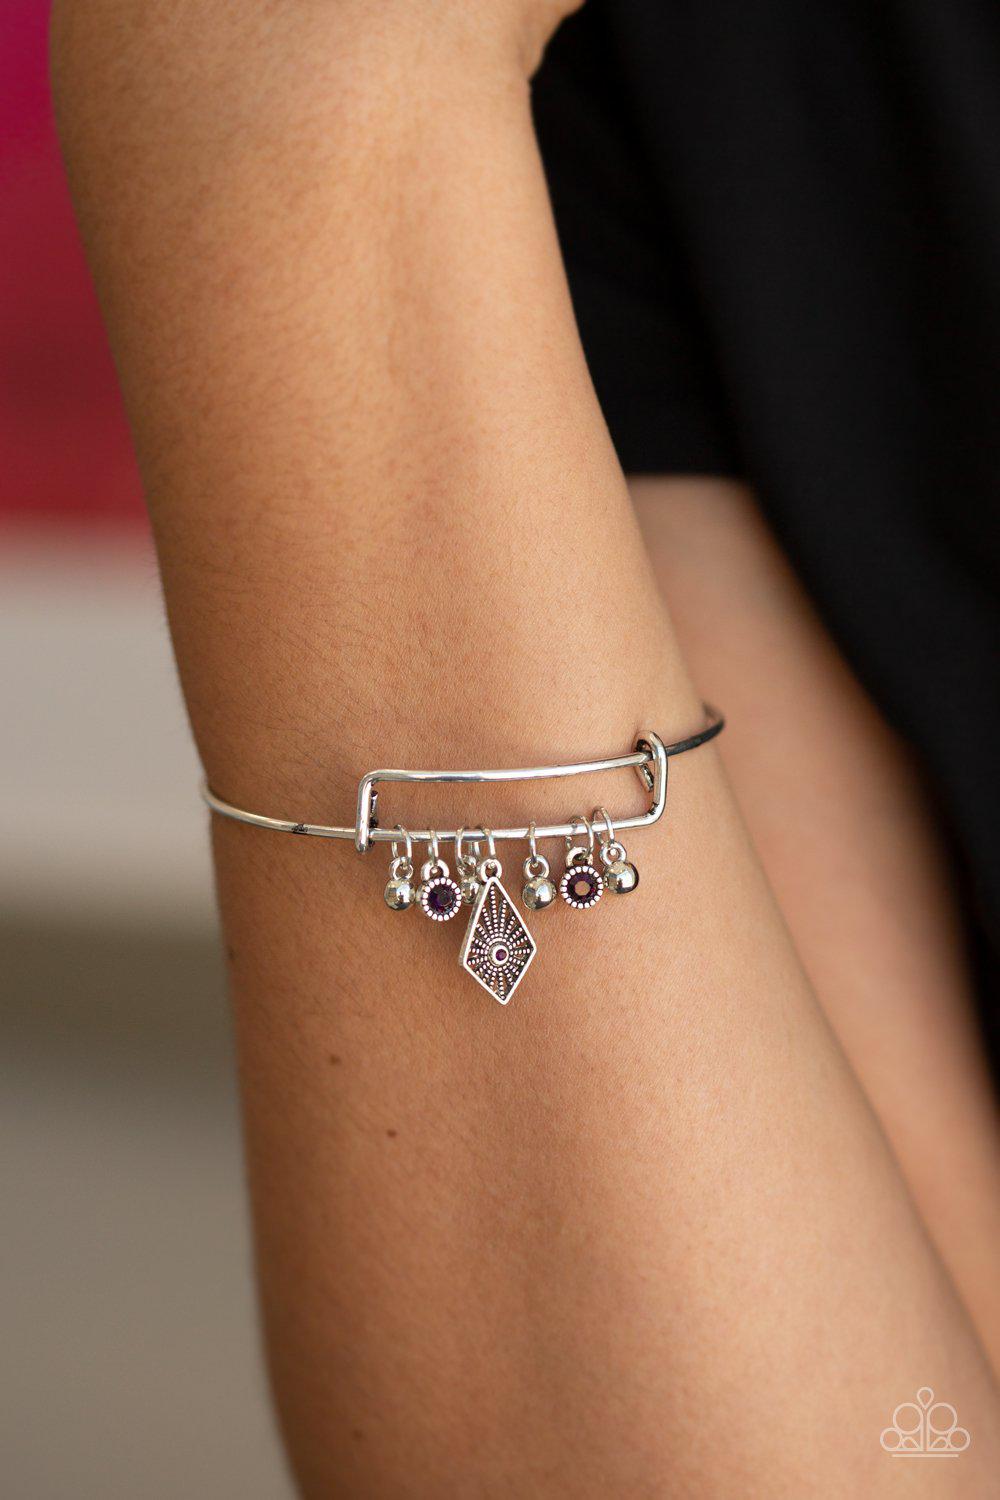 Treasure Charms Purple and Silver Charm Bangle Bracelet - Paparazzi Accessories-CarasShop.com - $5 Jewelry by Cara Jewels